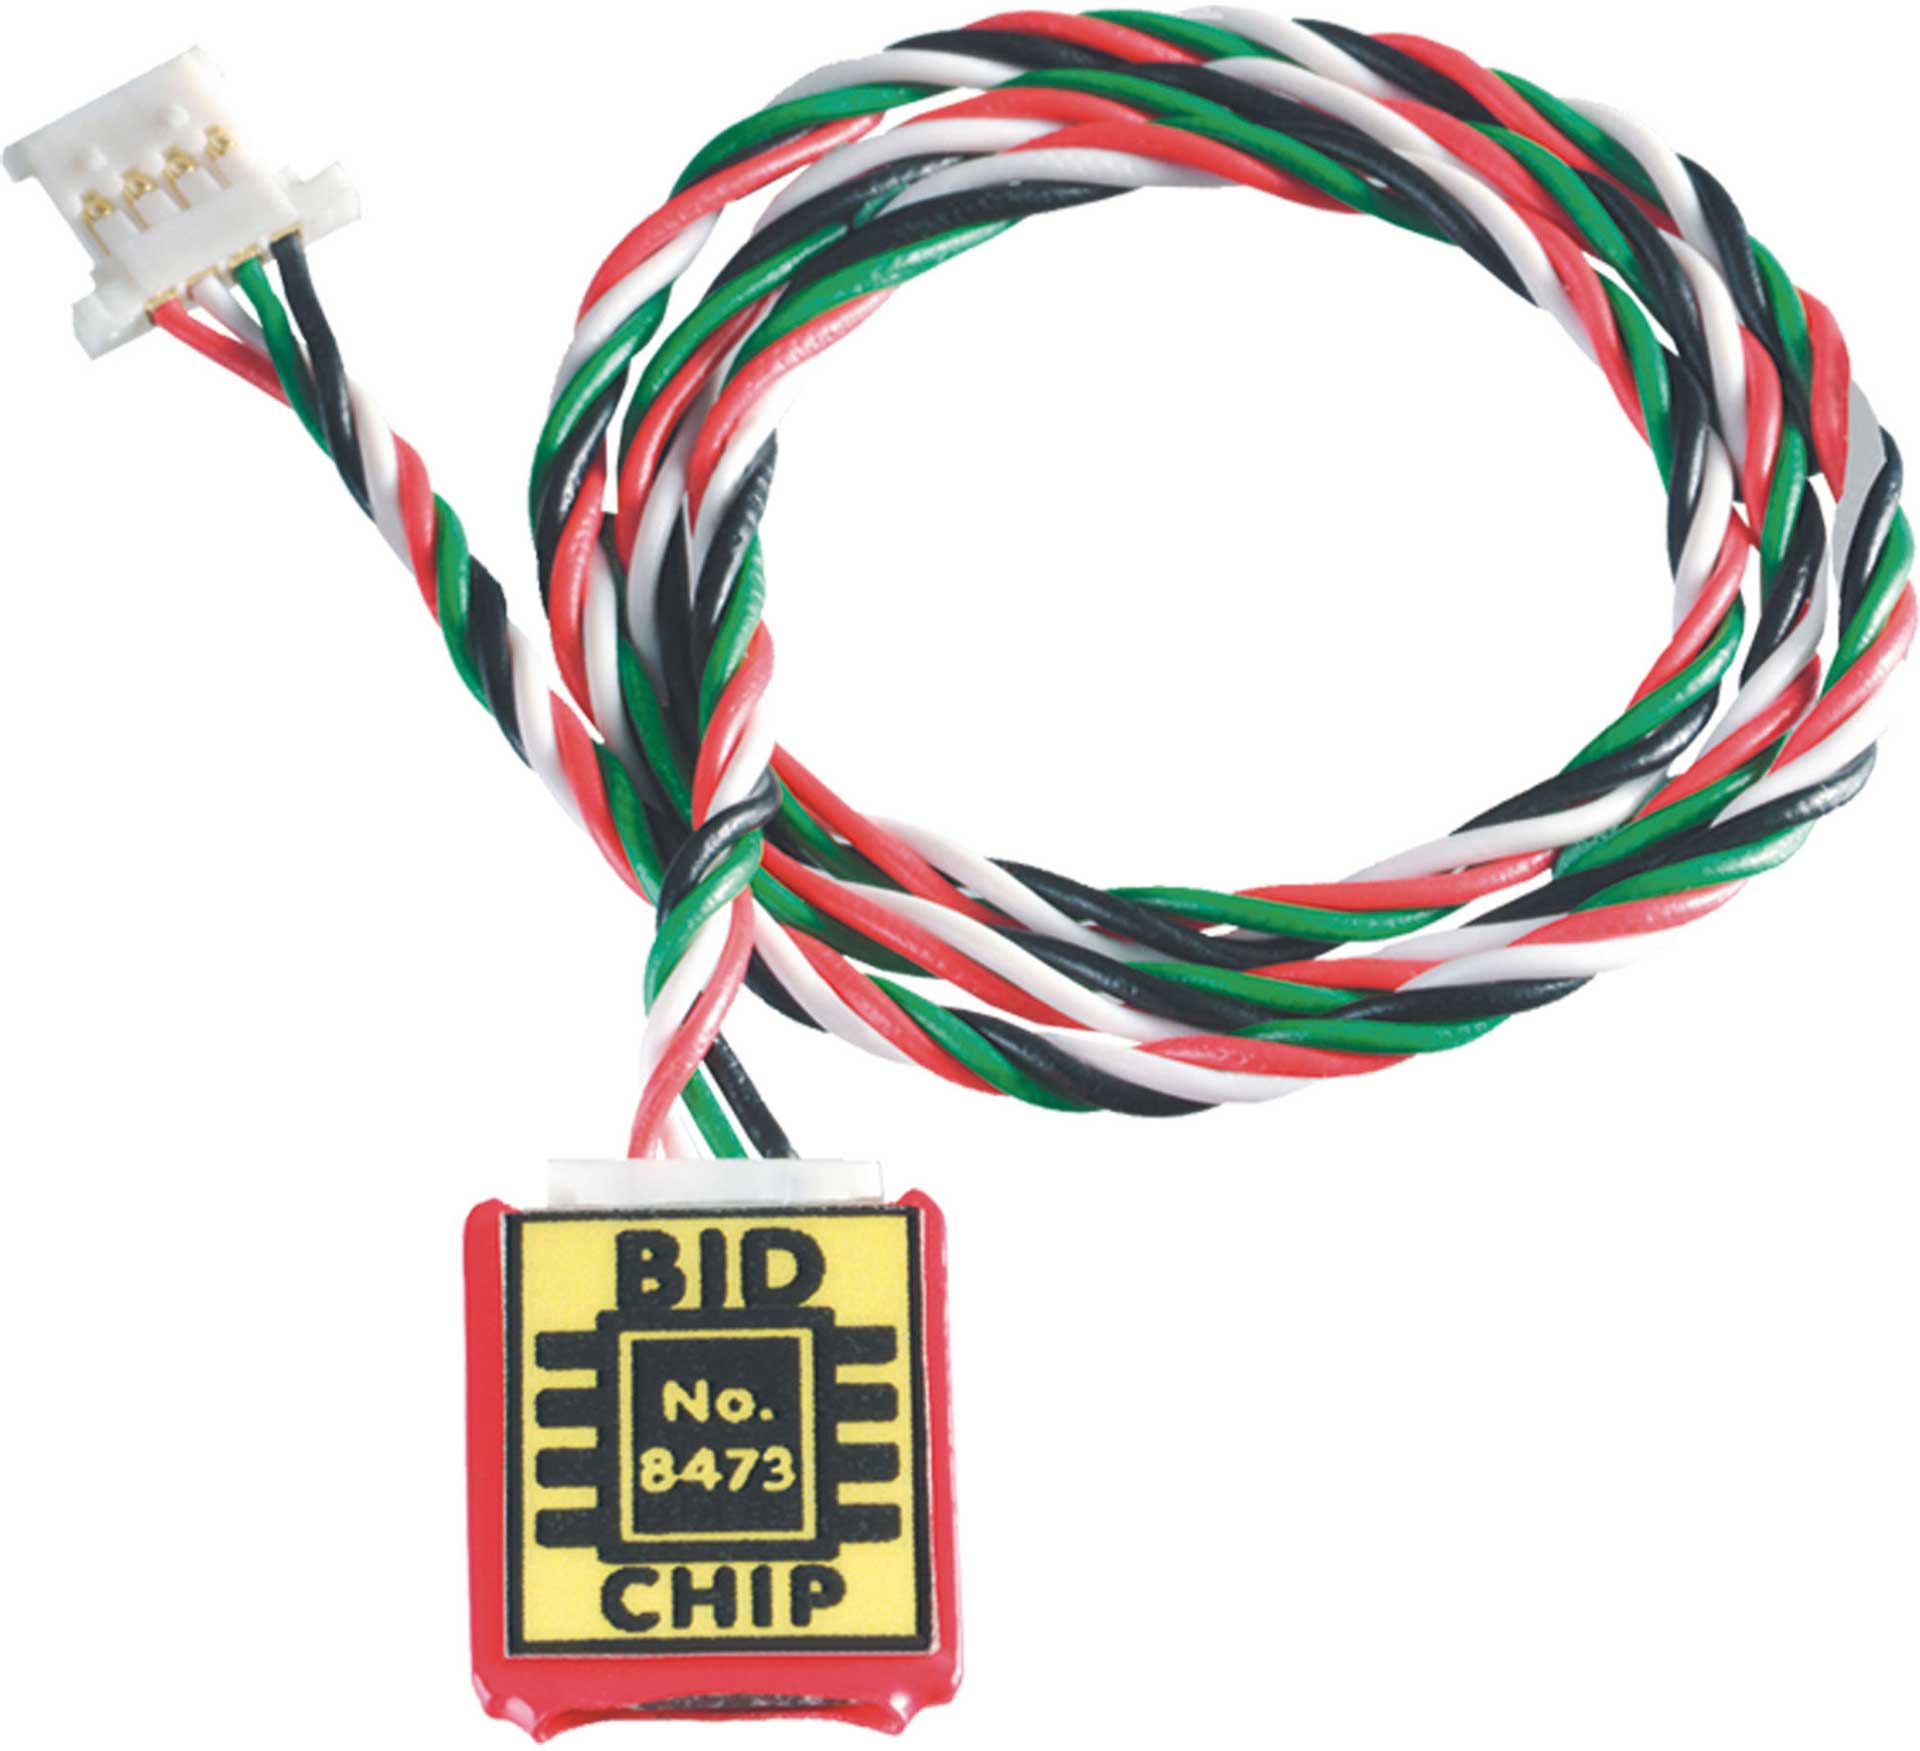 POWER PEAK BID CHIP WITH CABLE 300MM